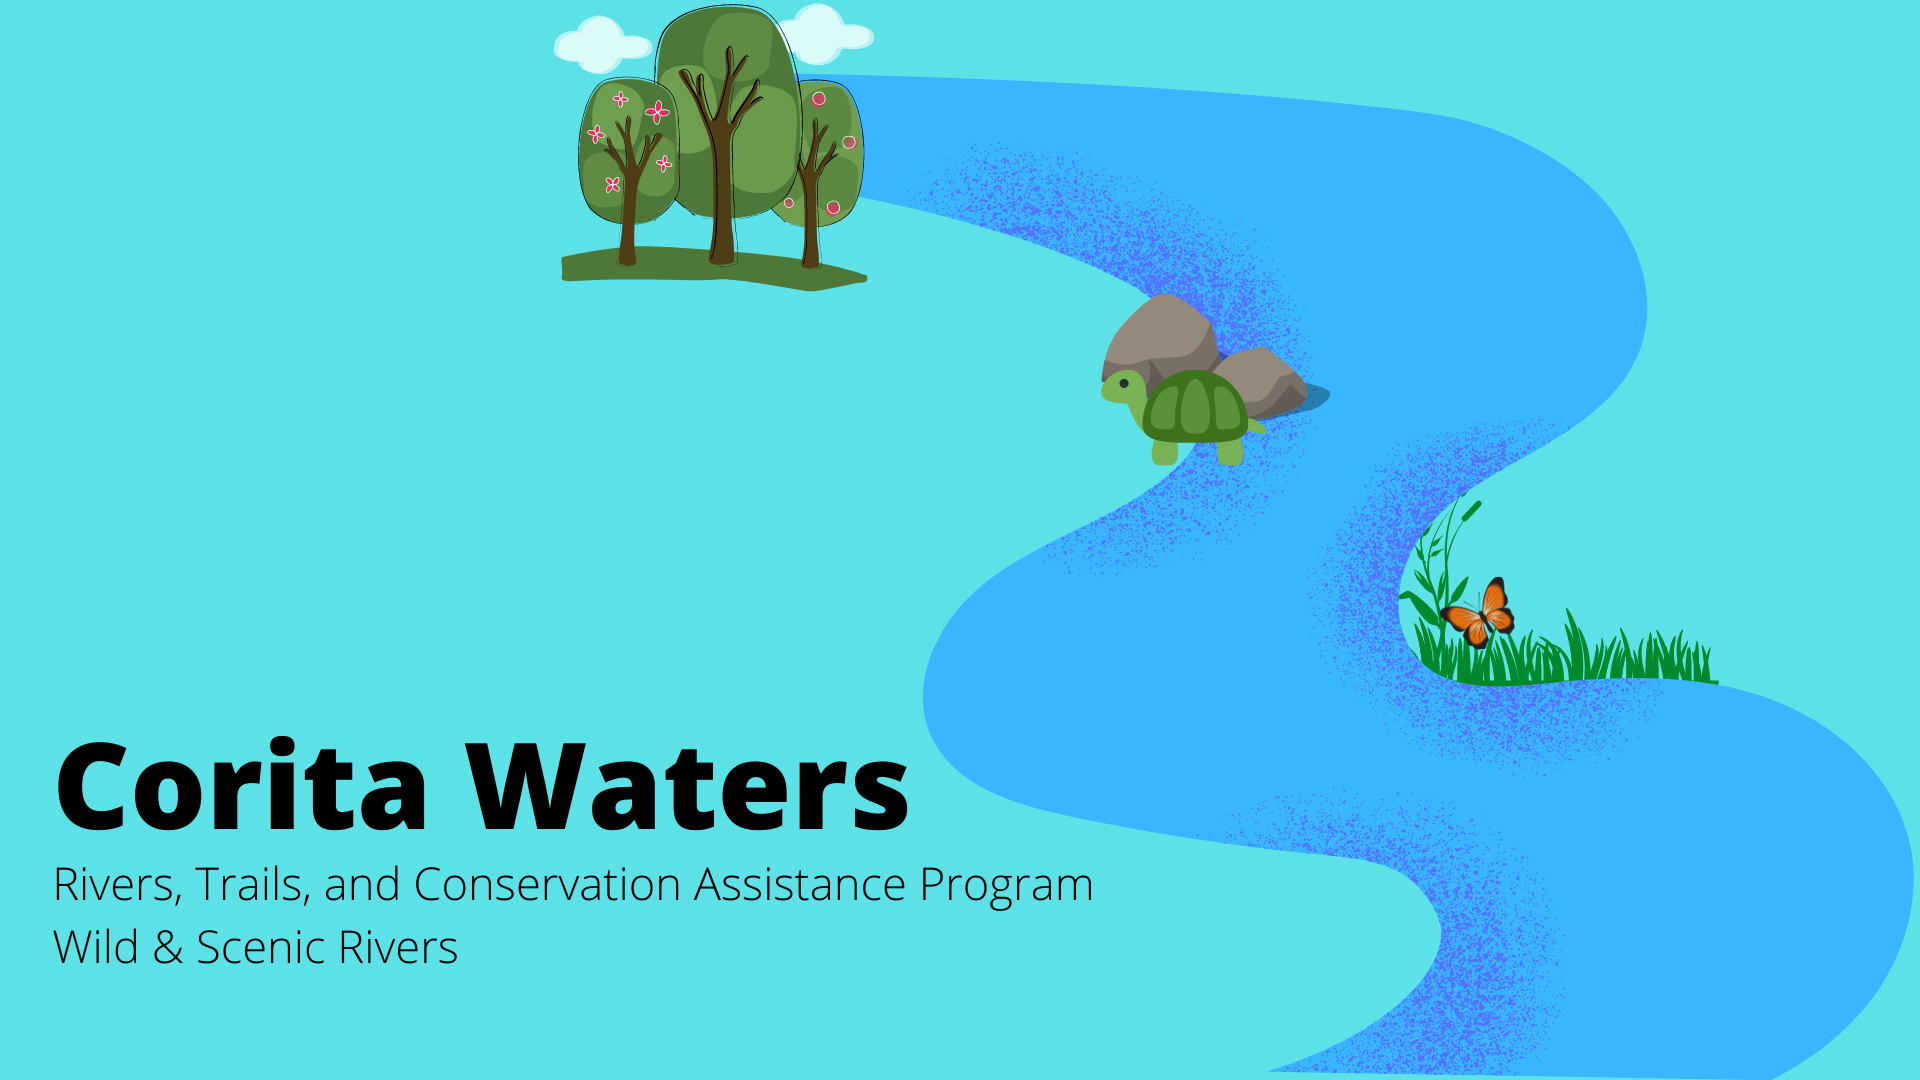 digital illustration of river with trees, rocks, turtle, grass, butterfly and text Corita Waters, Rivers, Trails, and Conservation Assistance Program, Wild and Scenic Rivers